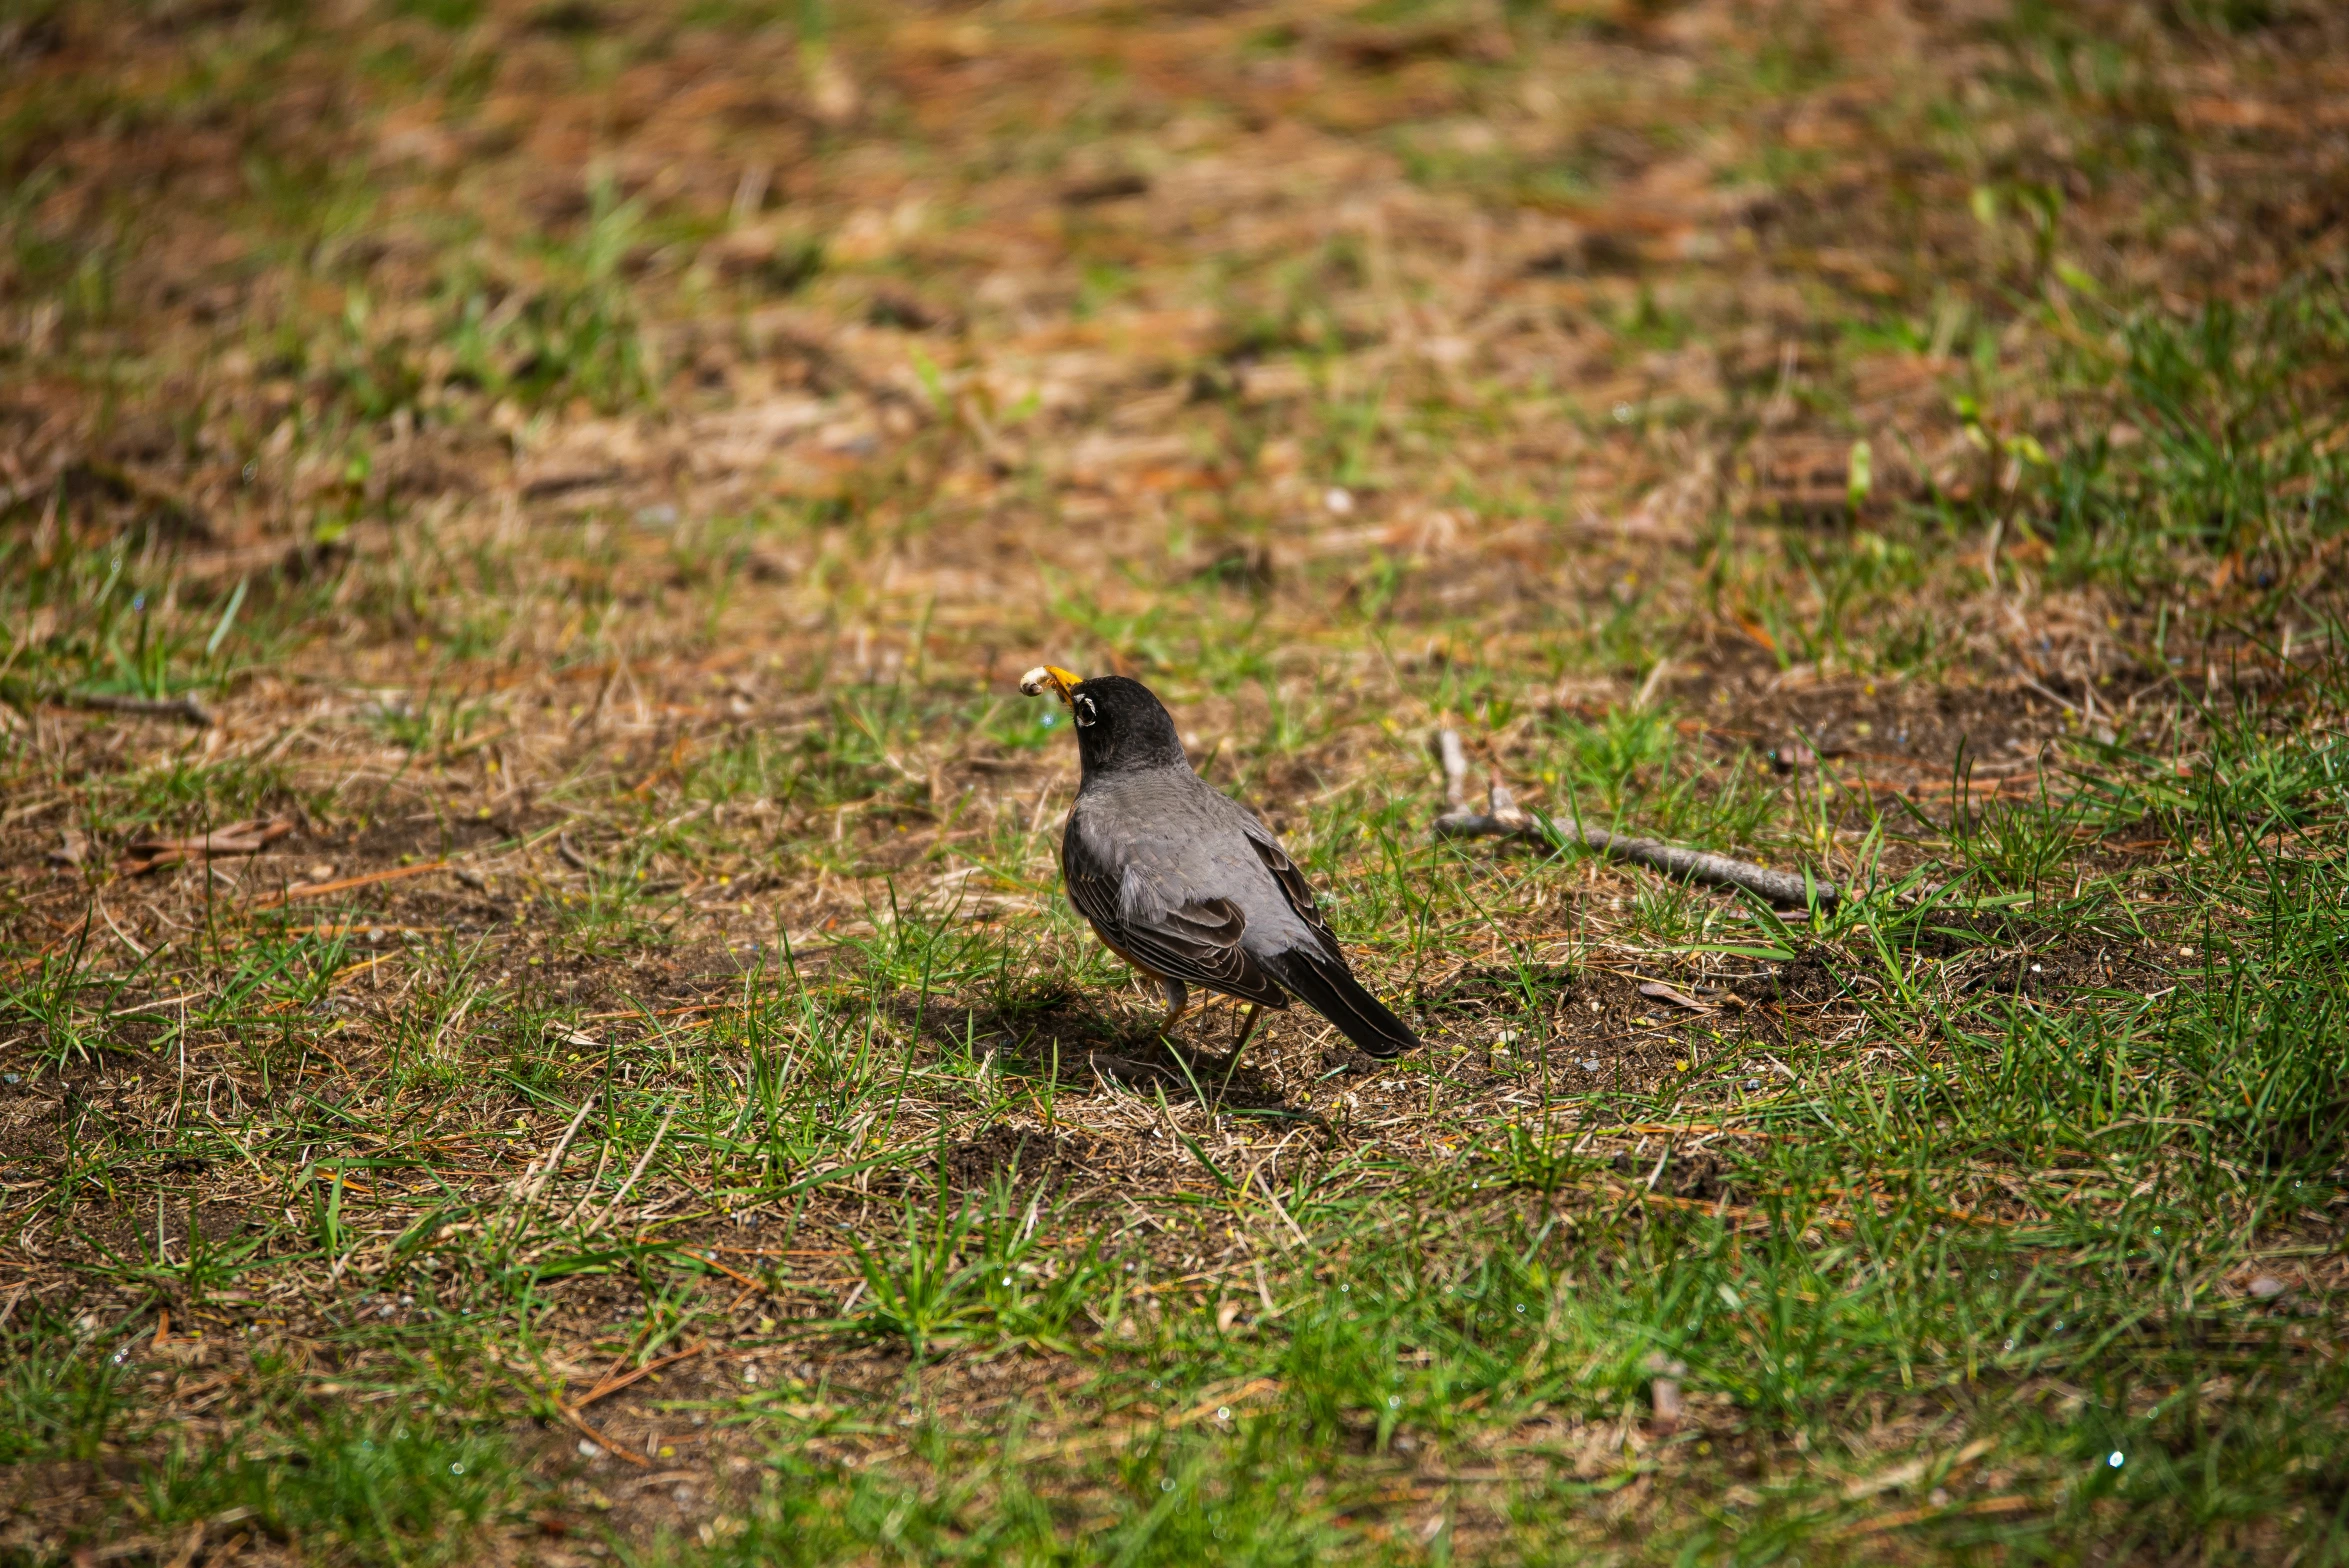 a bird is standing on grass outside